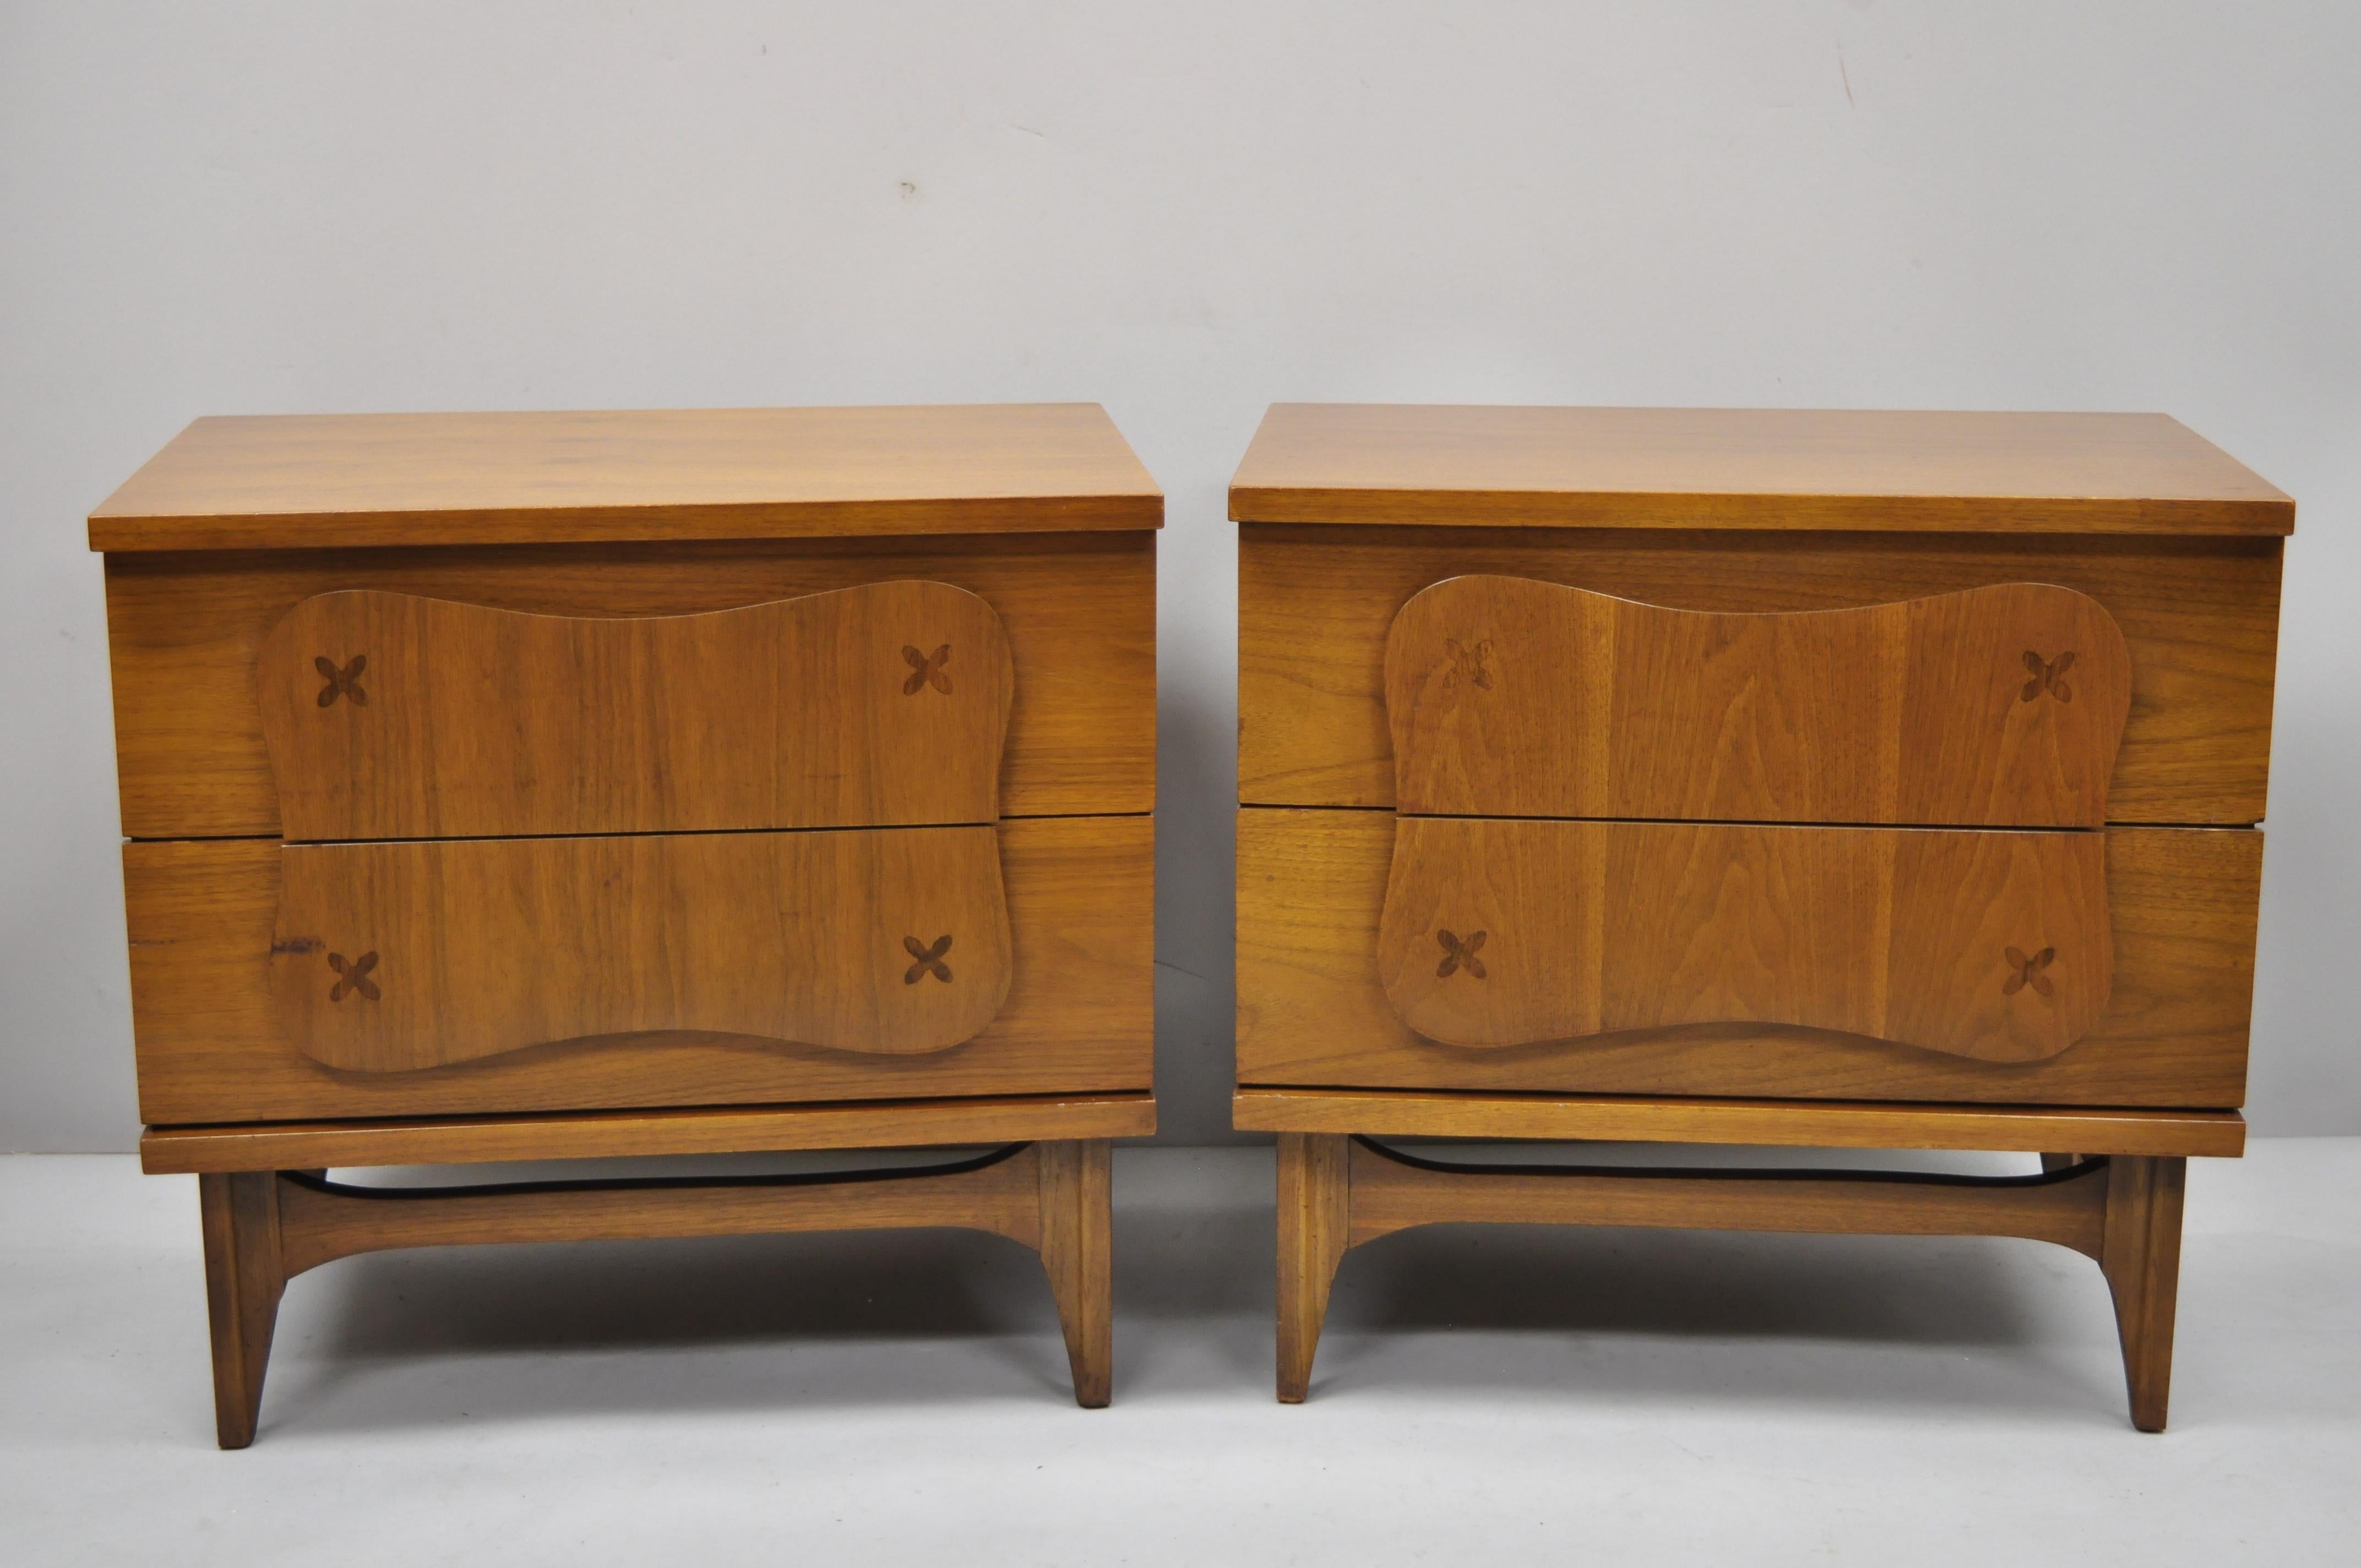 Pair of vintage Bassett Mid-Century Modern star inlay walnut nightstands bedside tables. Items feature sculpted wood pulls, star inlaid drawer fronts, tapered legs, beautiful wood grain, 2 dovetailed drawers, sleek sculptural form, circa mid-20th